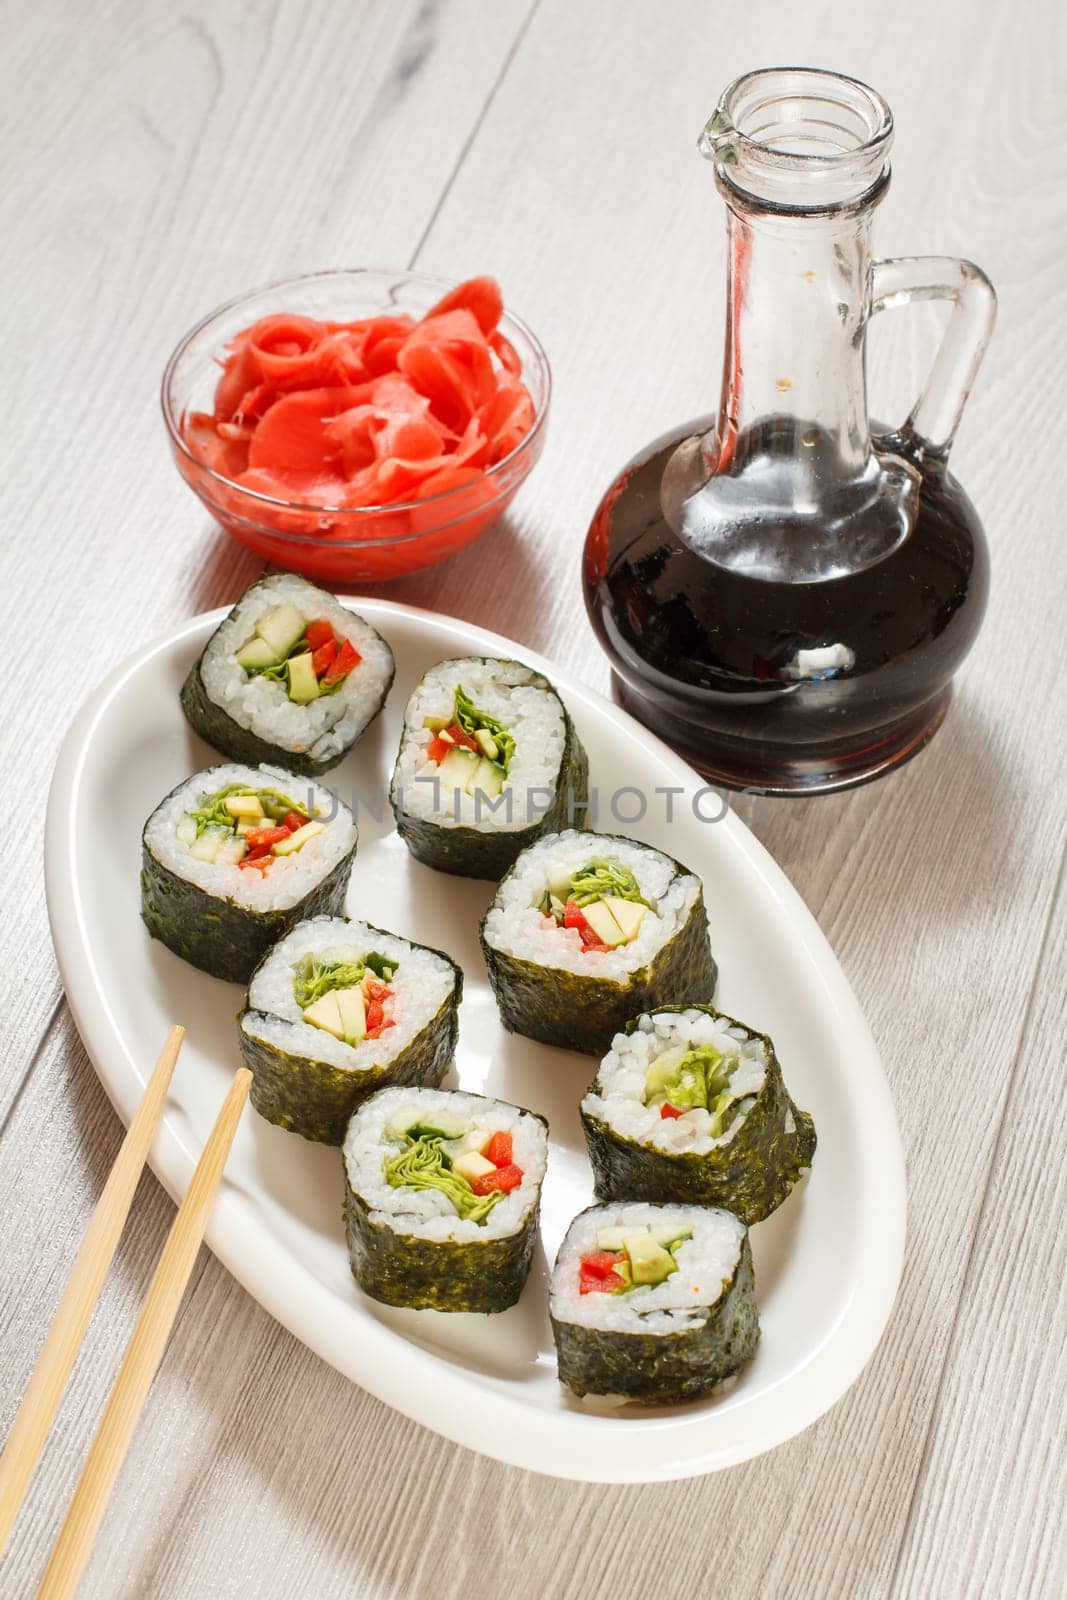 Sushi rolls with rice, pieces of avocado, cucumber, red bell pepper and lettuce leaves on ceramic plate, chopsticks, glass bottle with soy sauce and pickled ginger in a bowl. Vegetarian food